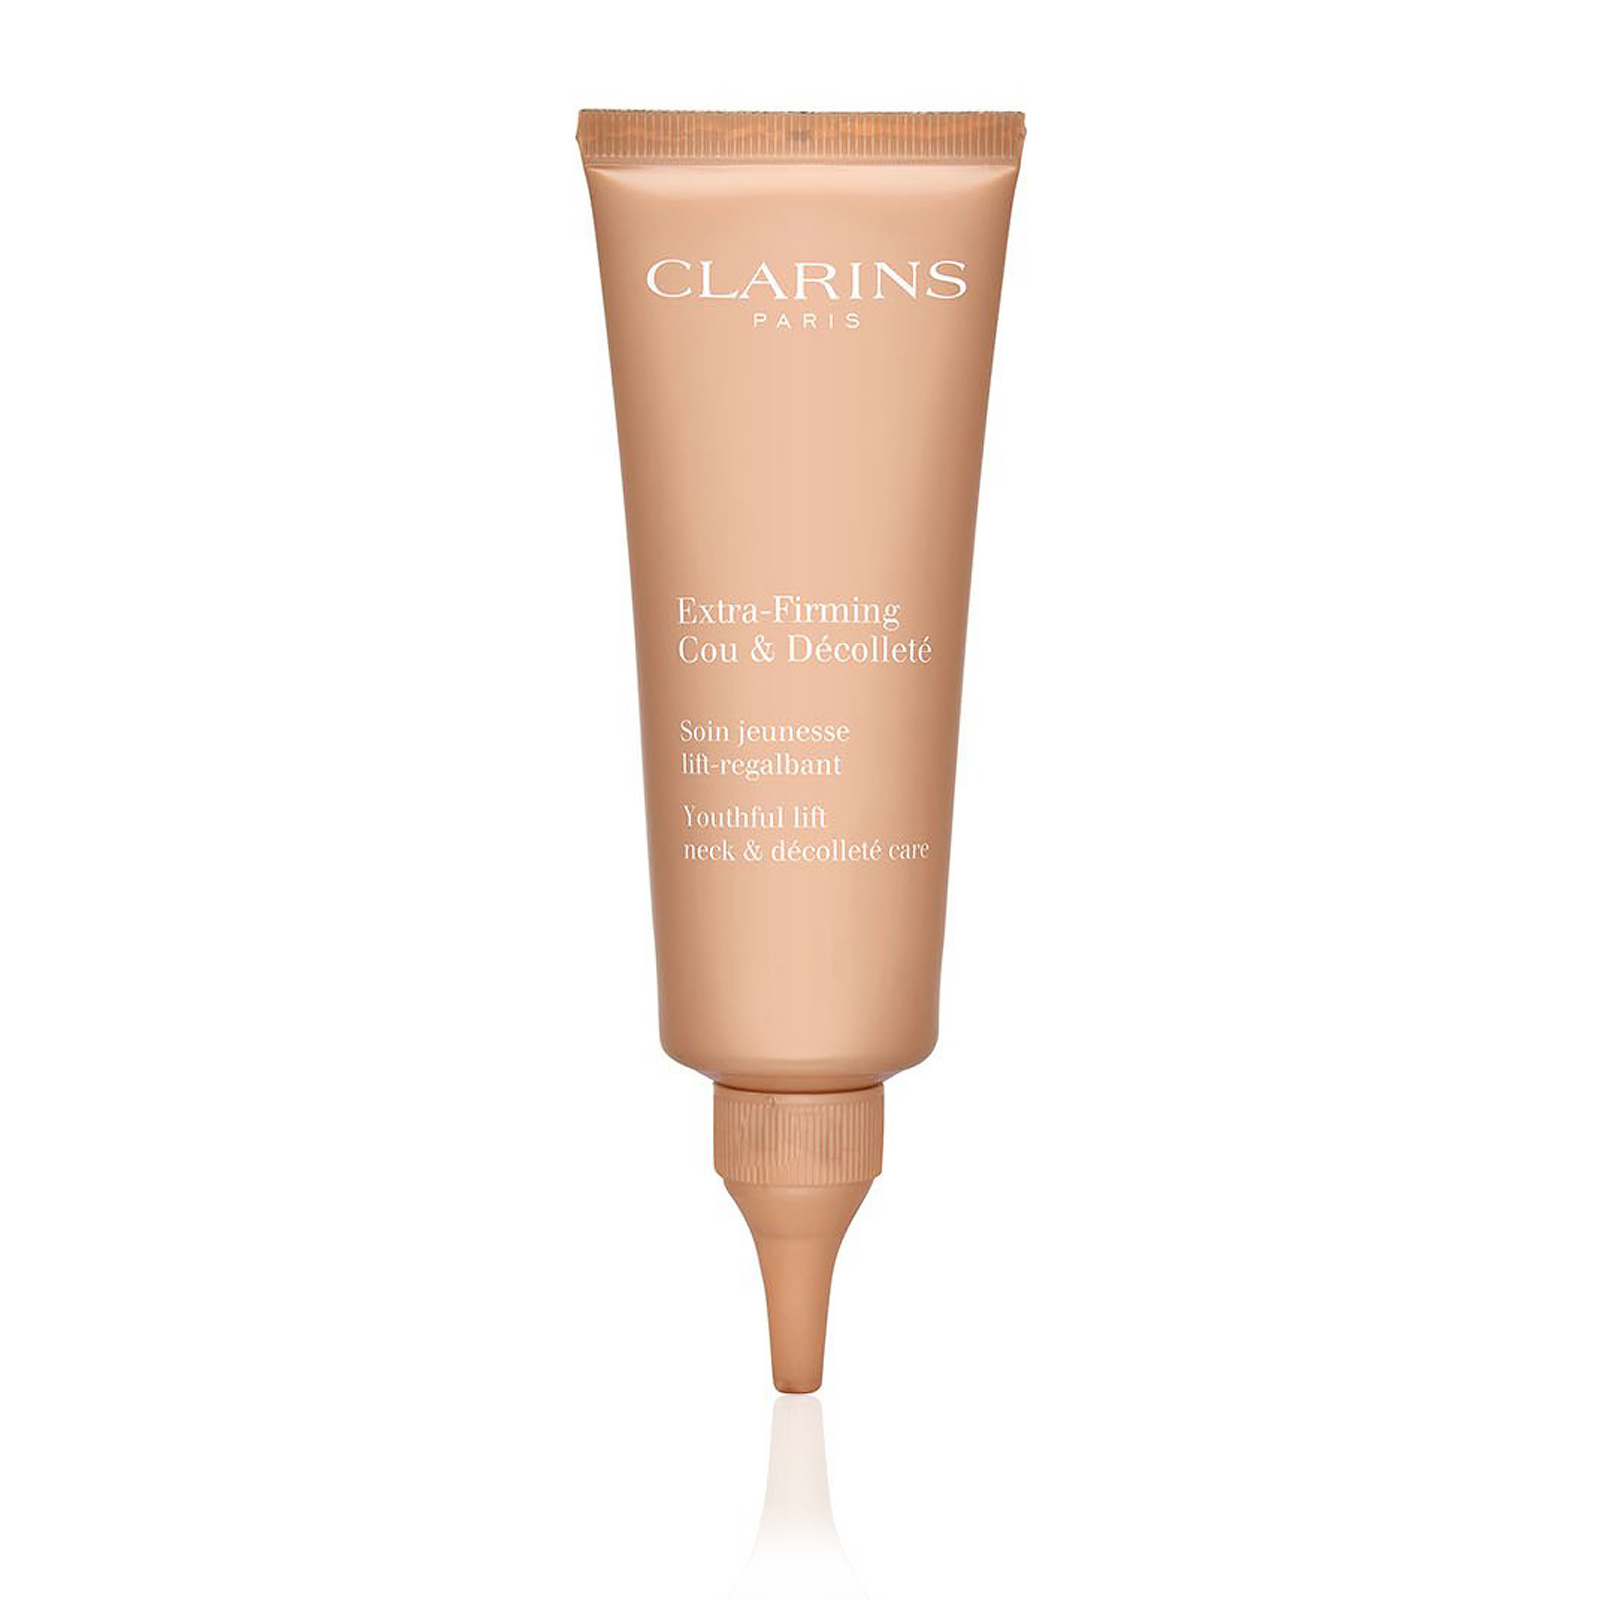 CLARINS BODY FIT ANTI-CELLULITE CONTOURING EXPERT 6.9 OZ NWB 